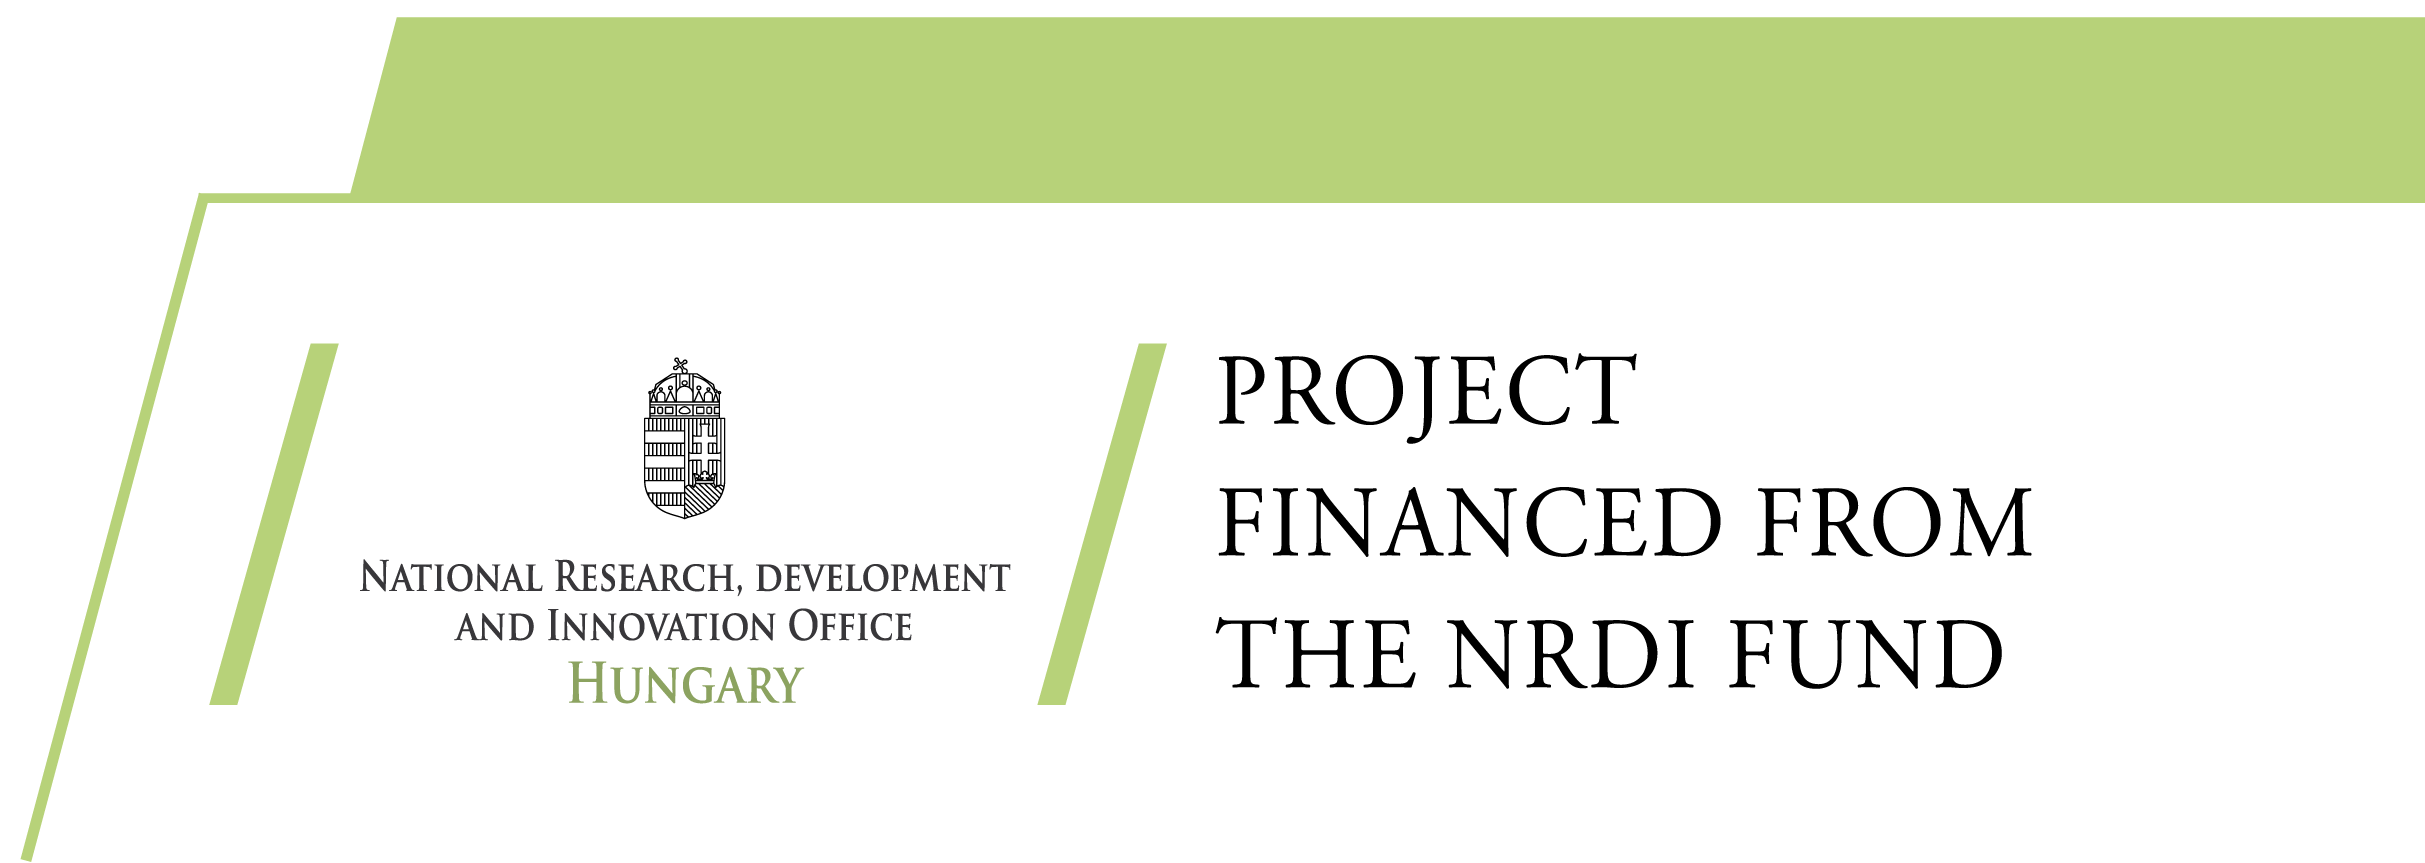 National Research, Development and Innovation Office - Project financed from the NRDI fund